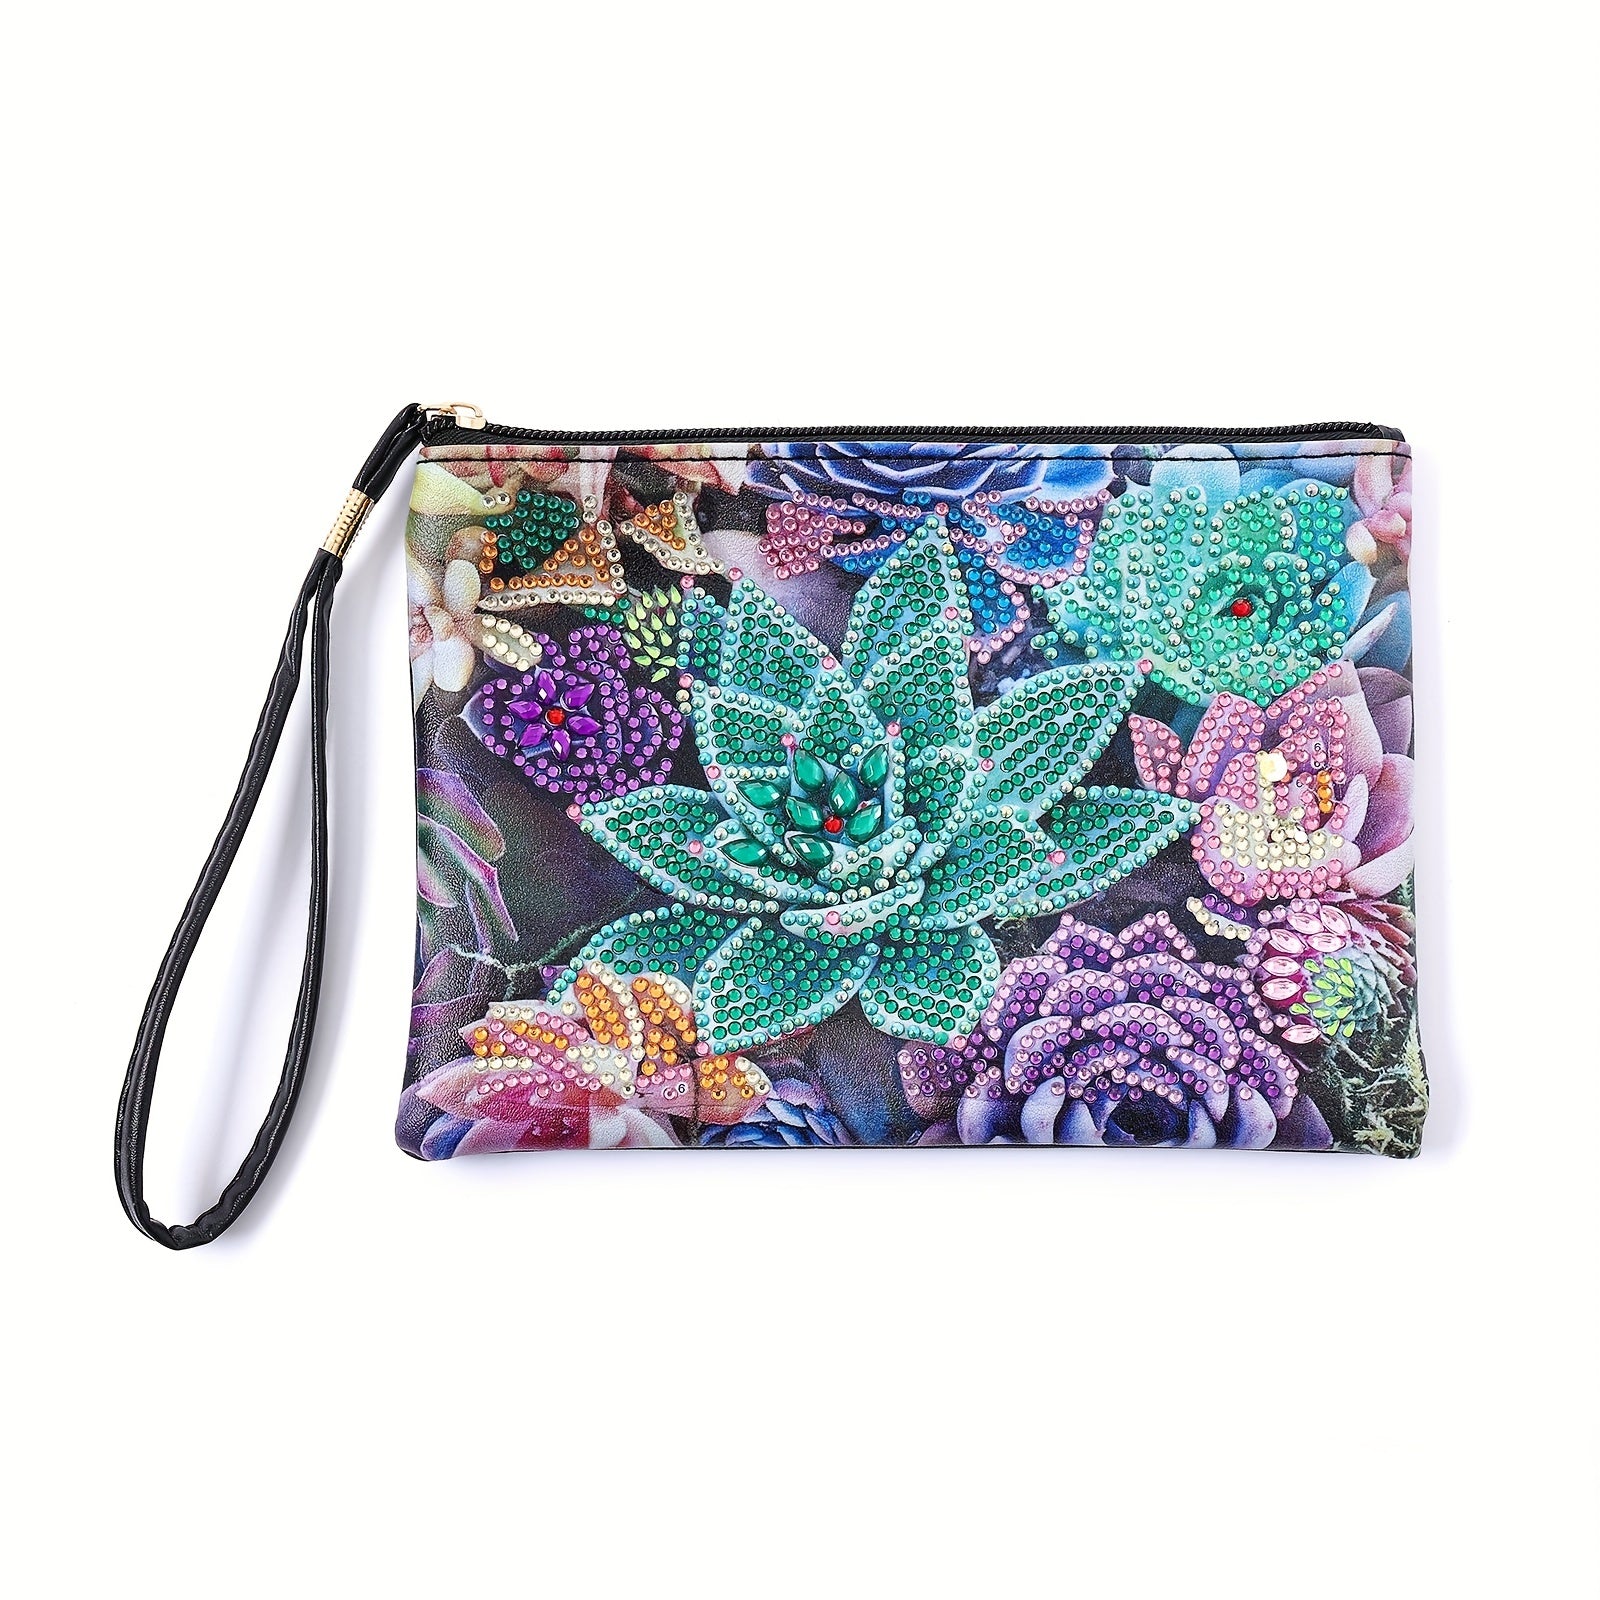 1pc Succulent Style Diamond Painting Clutch 5D DIY Diamond Painting Clutch Makeup Bag Handmade Diamond Art Craft Womens Wristband Clutch And Zipper Bag 155cm21cm61in827in Suitable For Adult Gifts